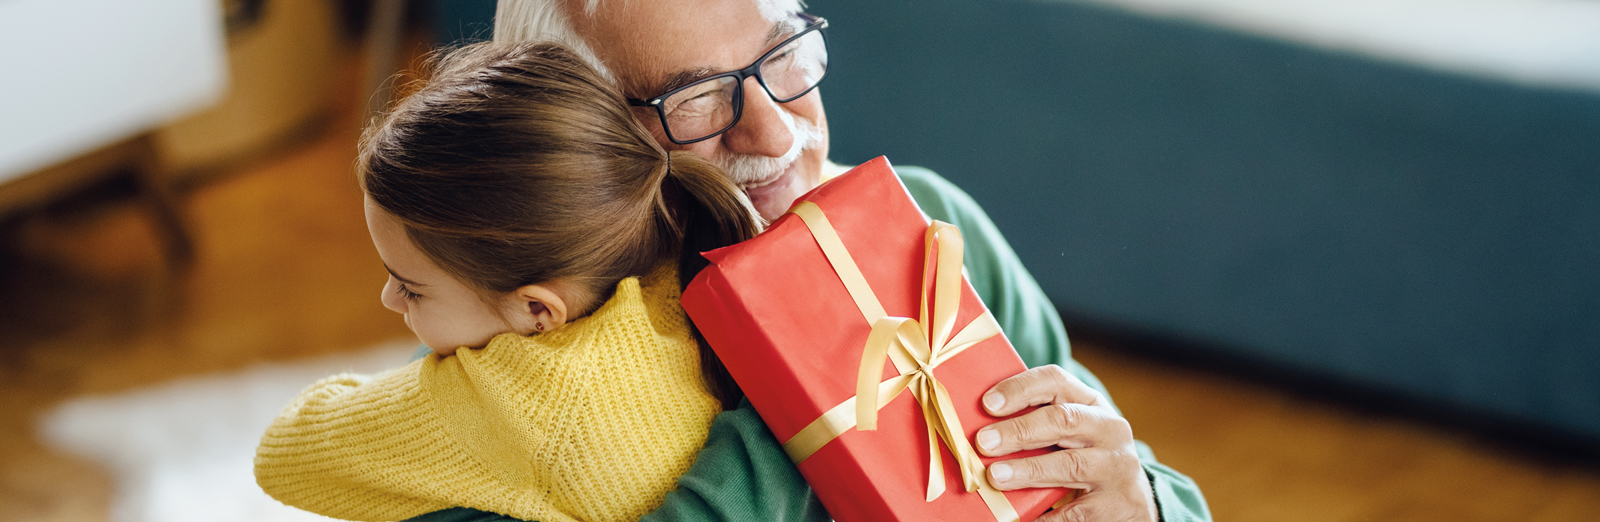 grandfather-with-gift-1600x522.jpg